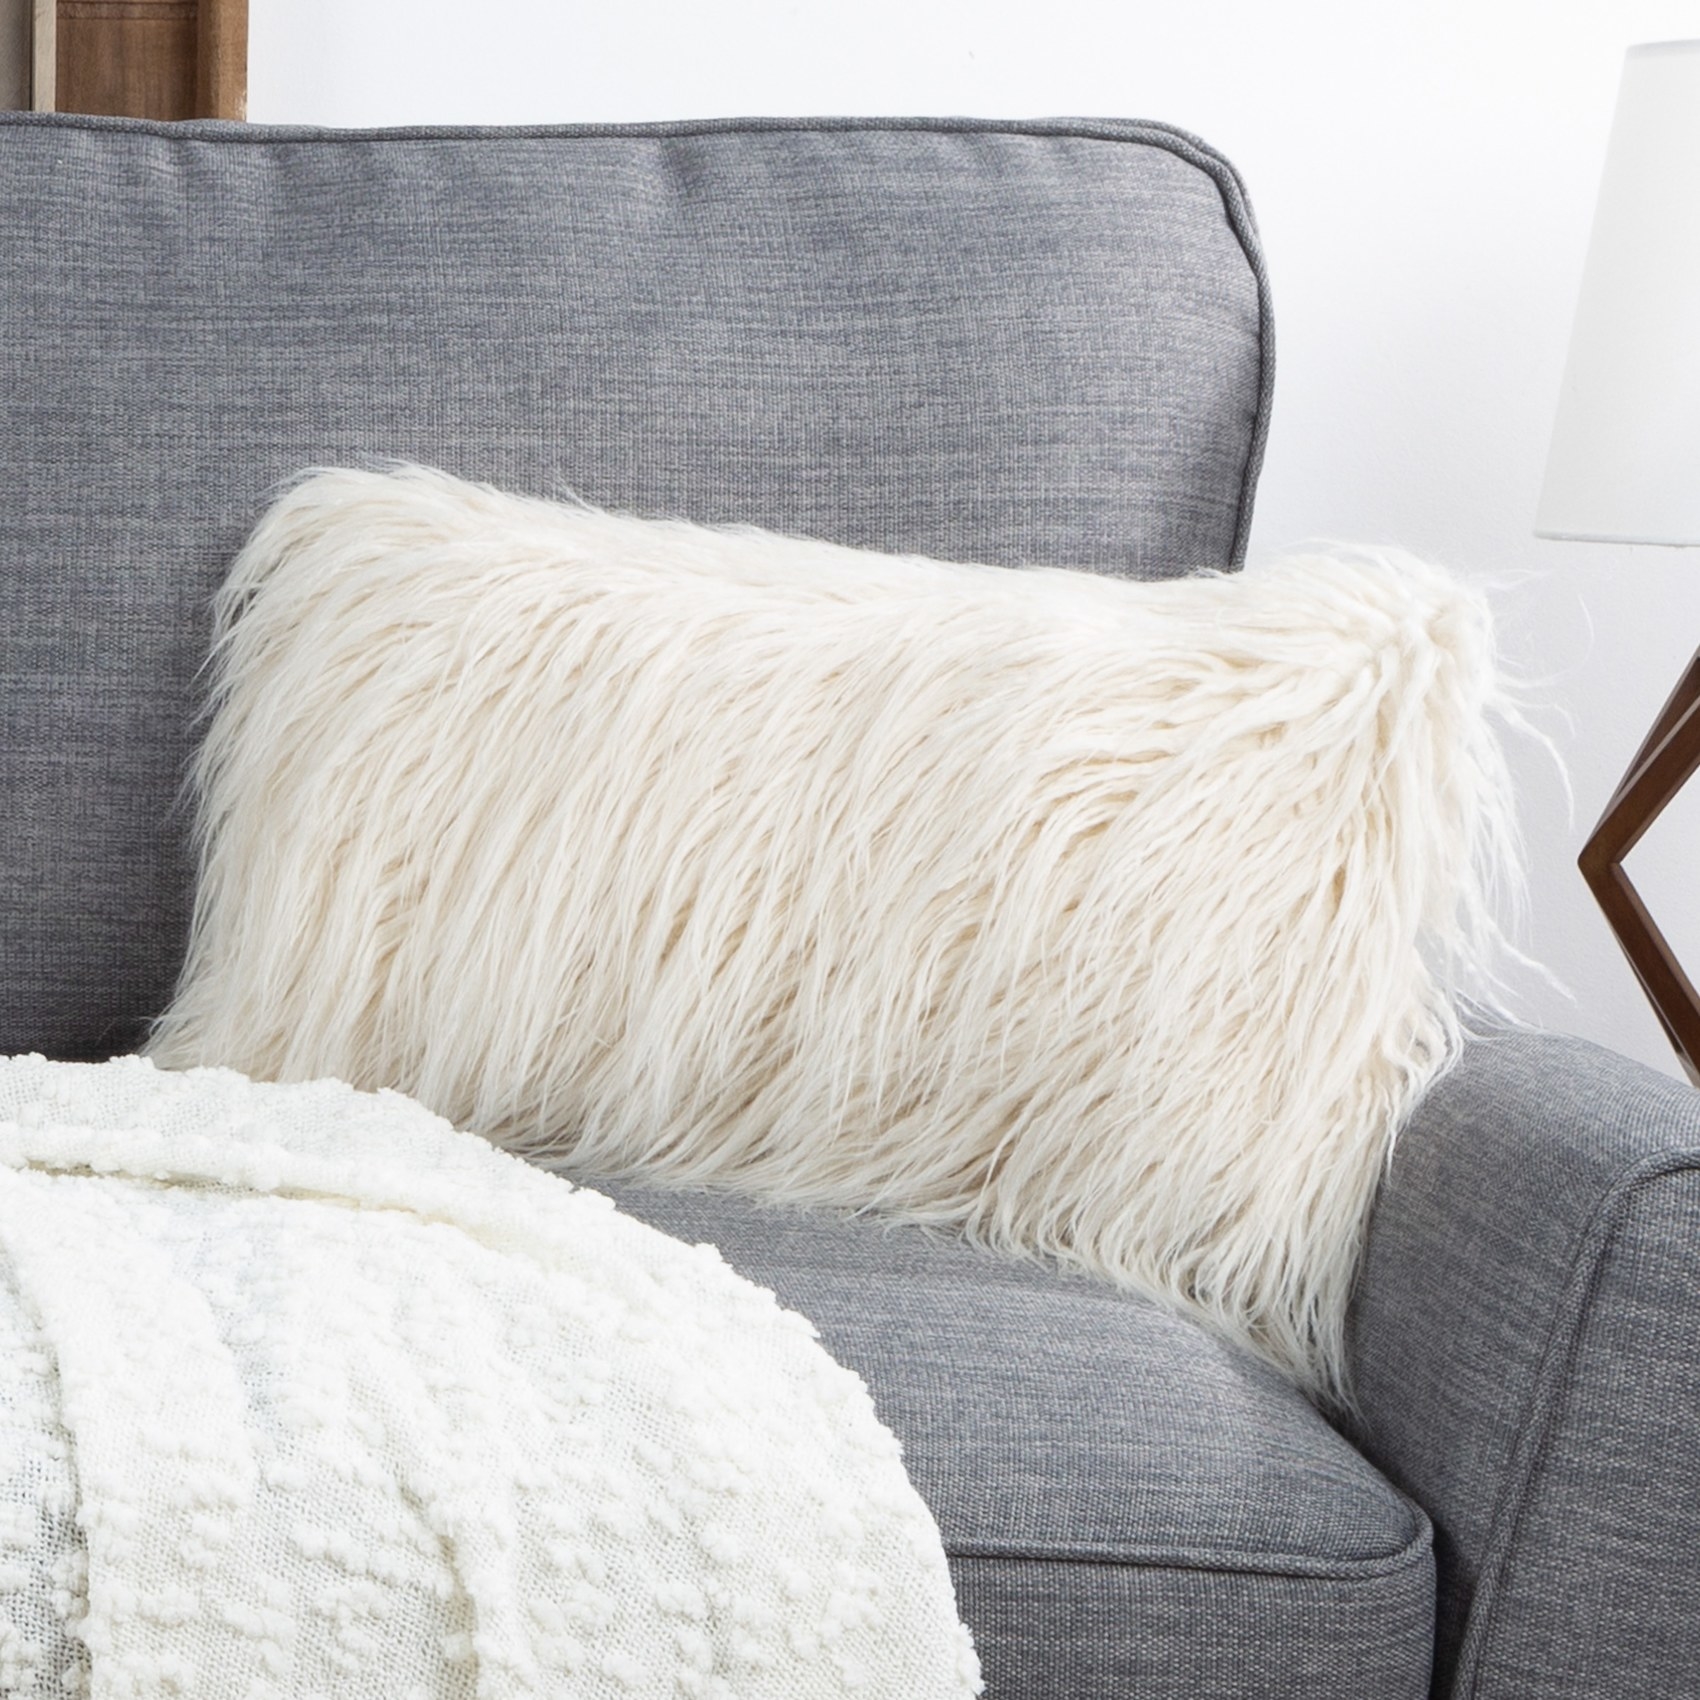 The furry white lumbar pillow on a couch